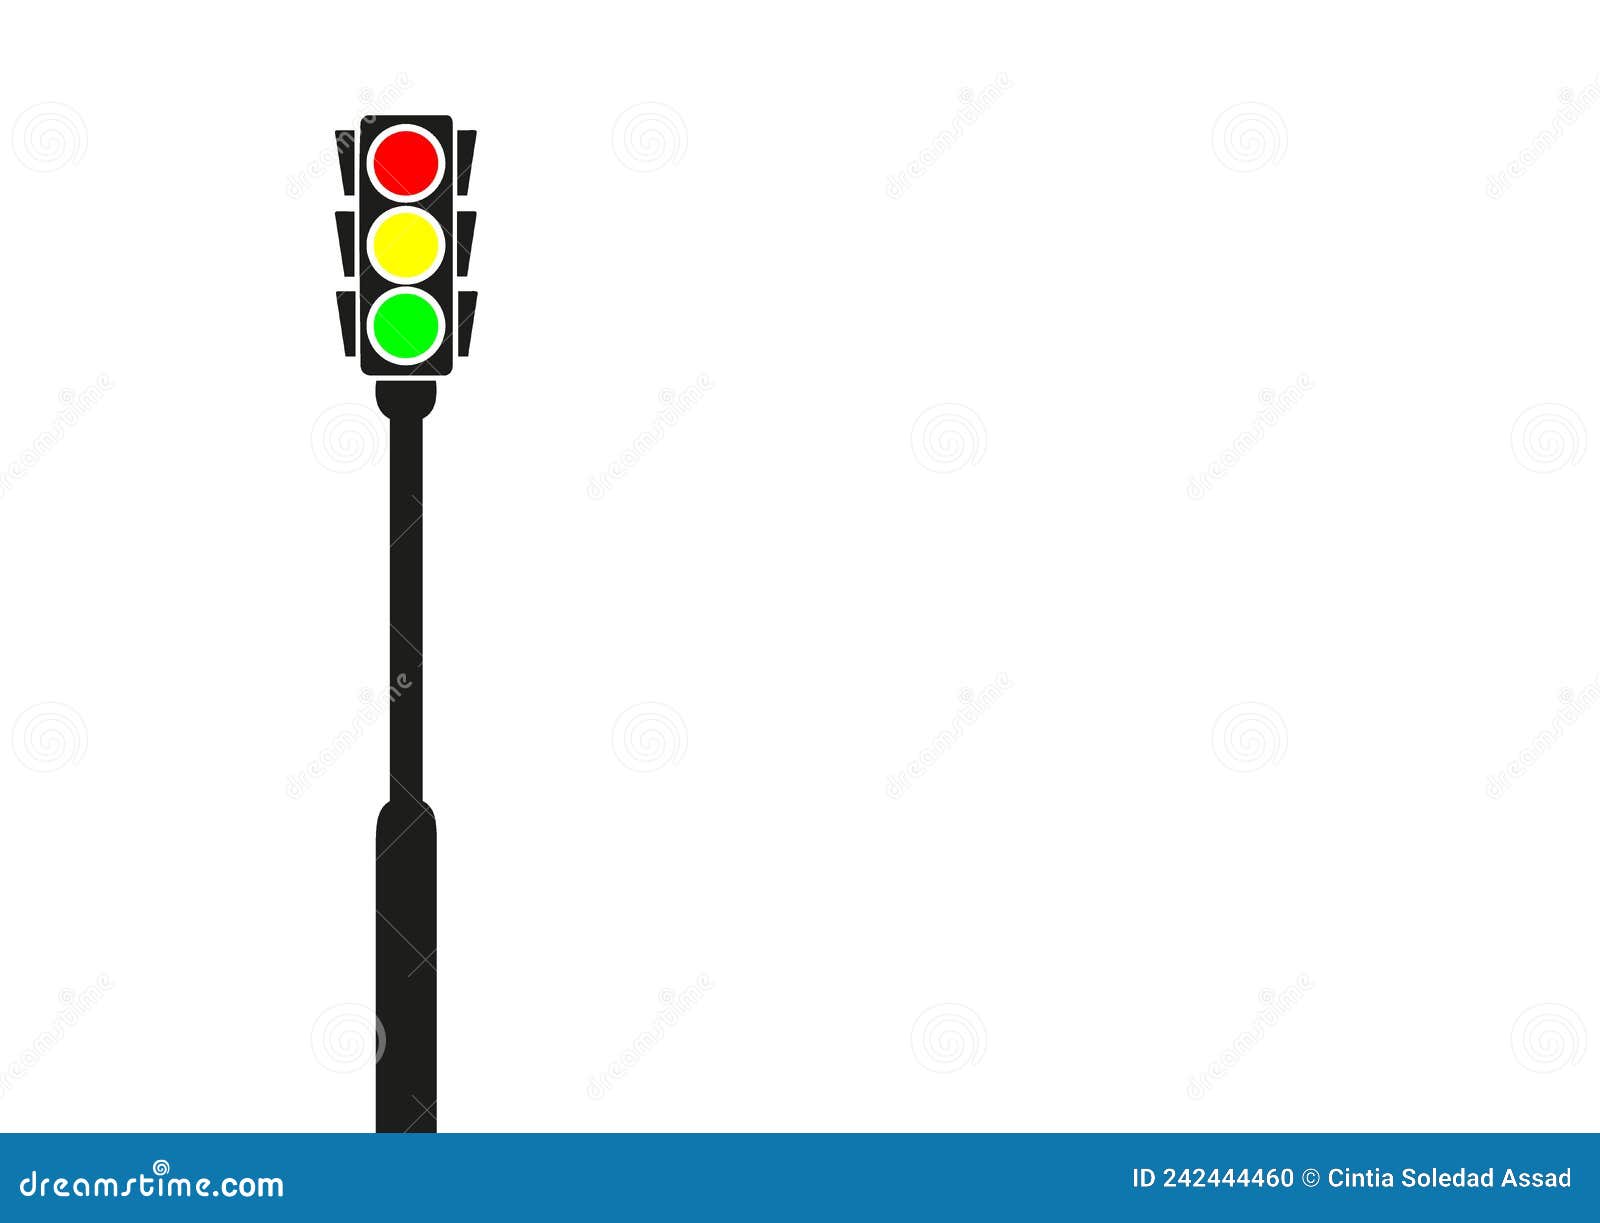 standing traffic light with space for text, white background